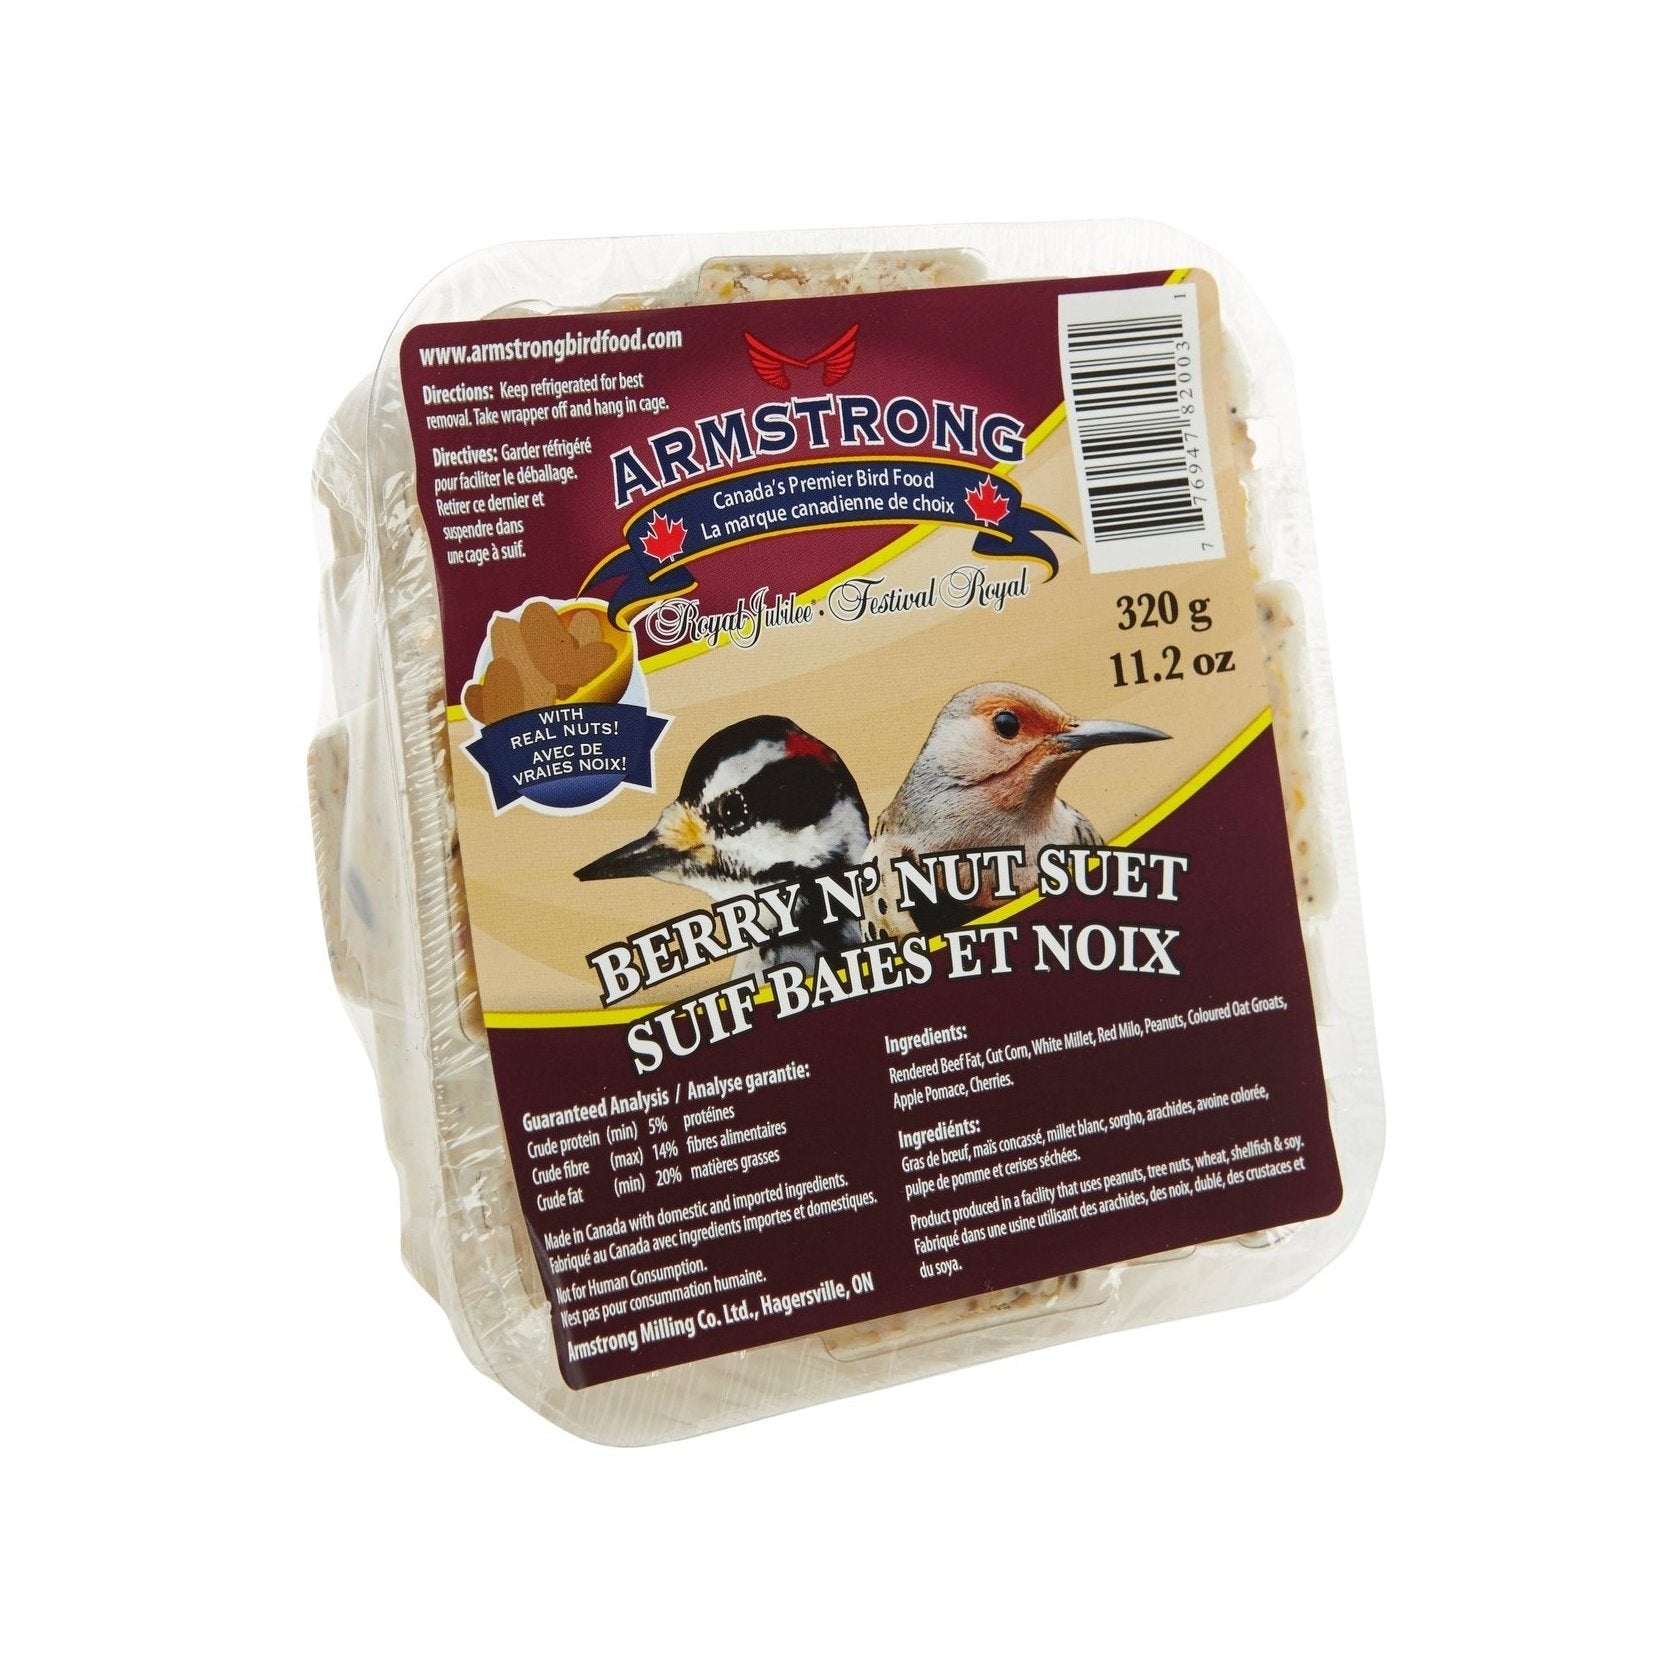 Berry and nut suet, 320g - Armstrong